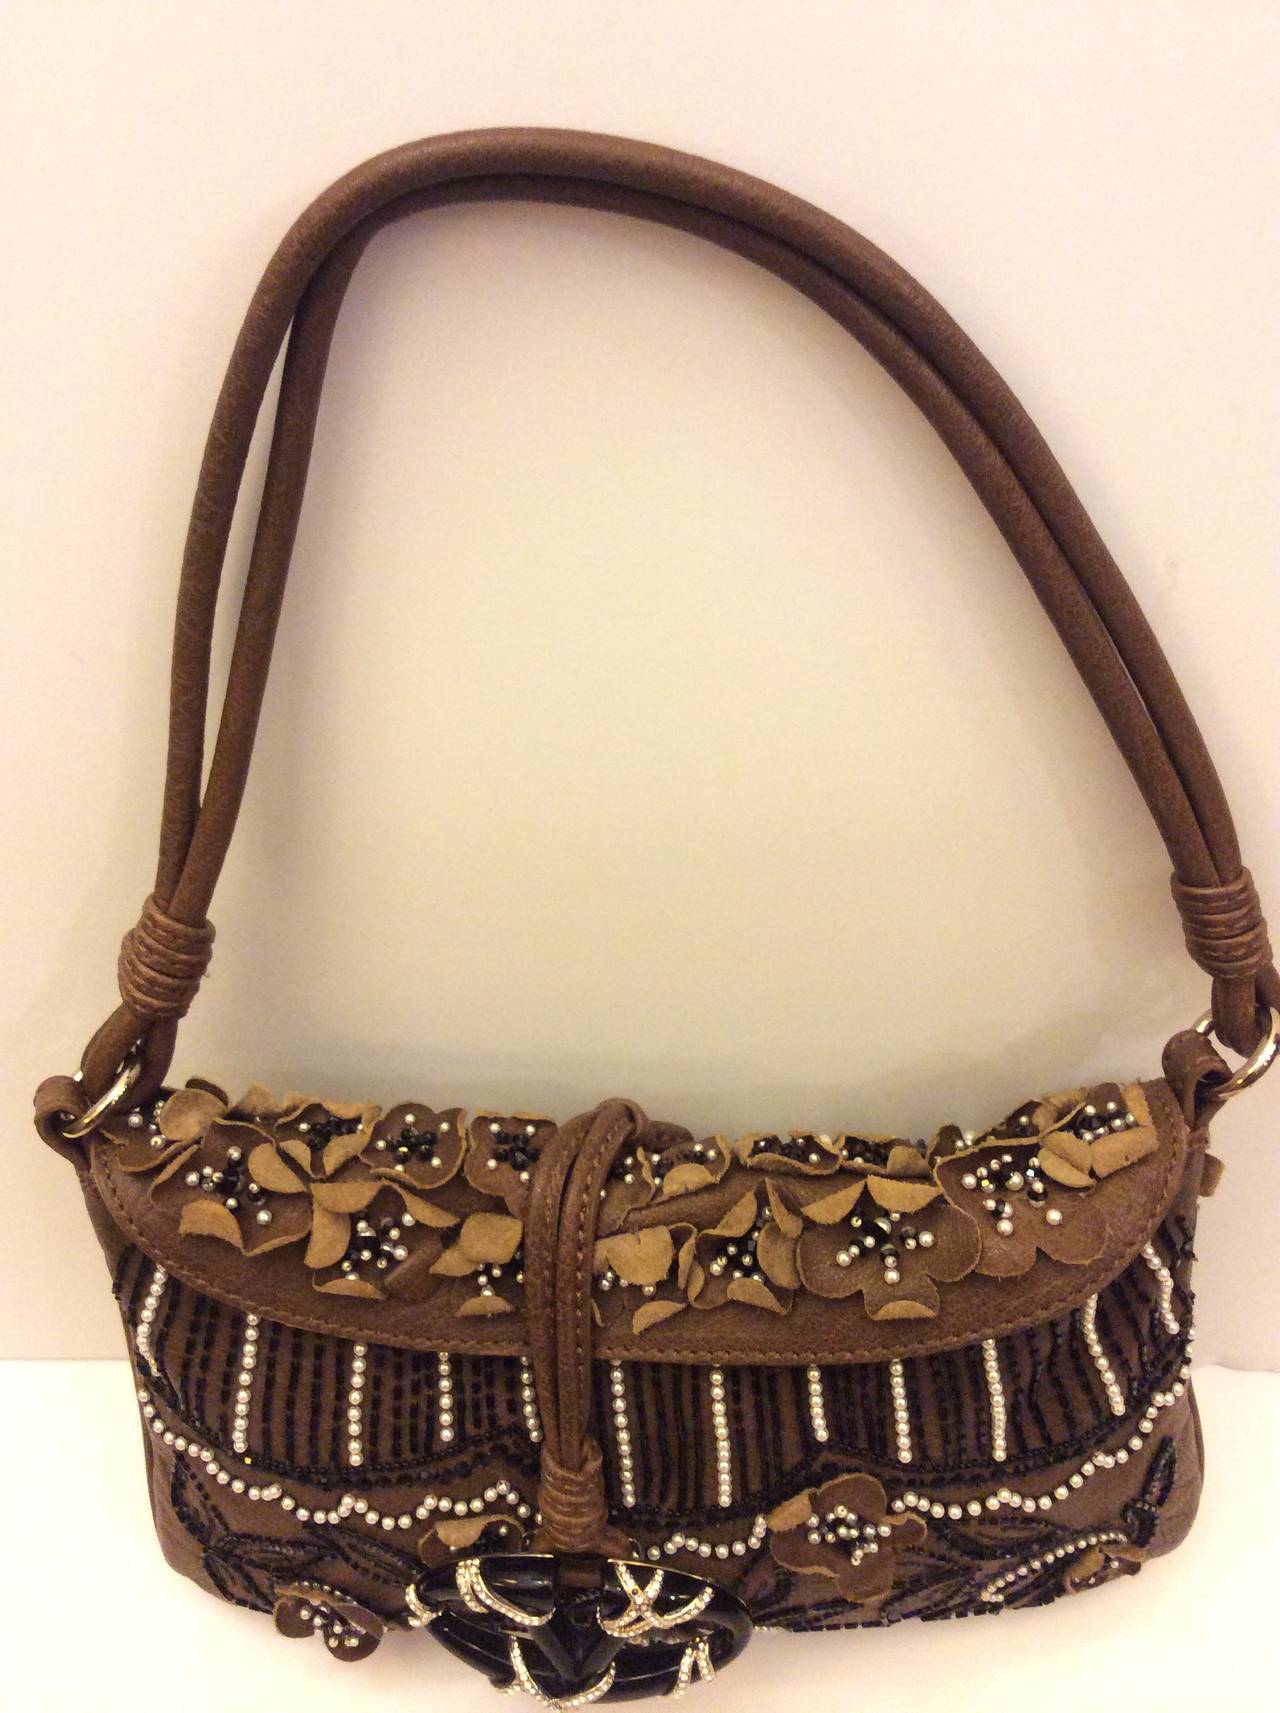 This is an absolutely stunning Valentino Garavani Brown leather evening handbag embellished with black beans and white pearls. Minimal flap closure with classic Valentino Swarovski crystal encrusted V toggle detail.  Beige silk lining. 
Made in